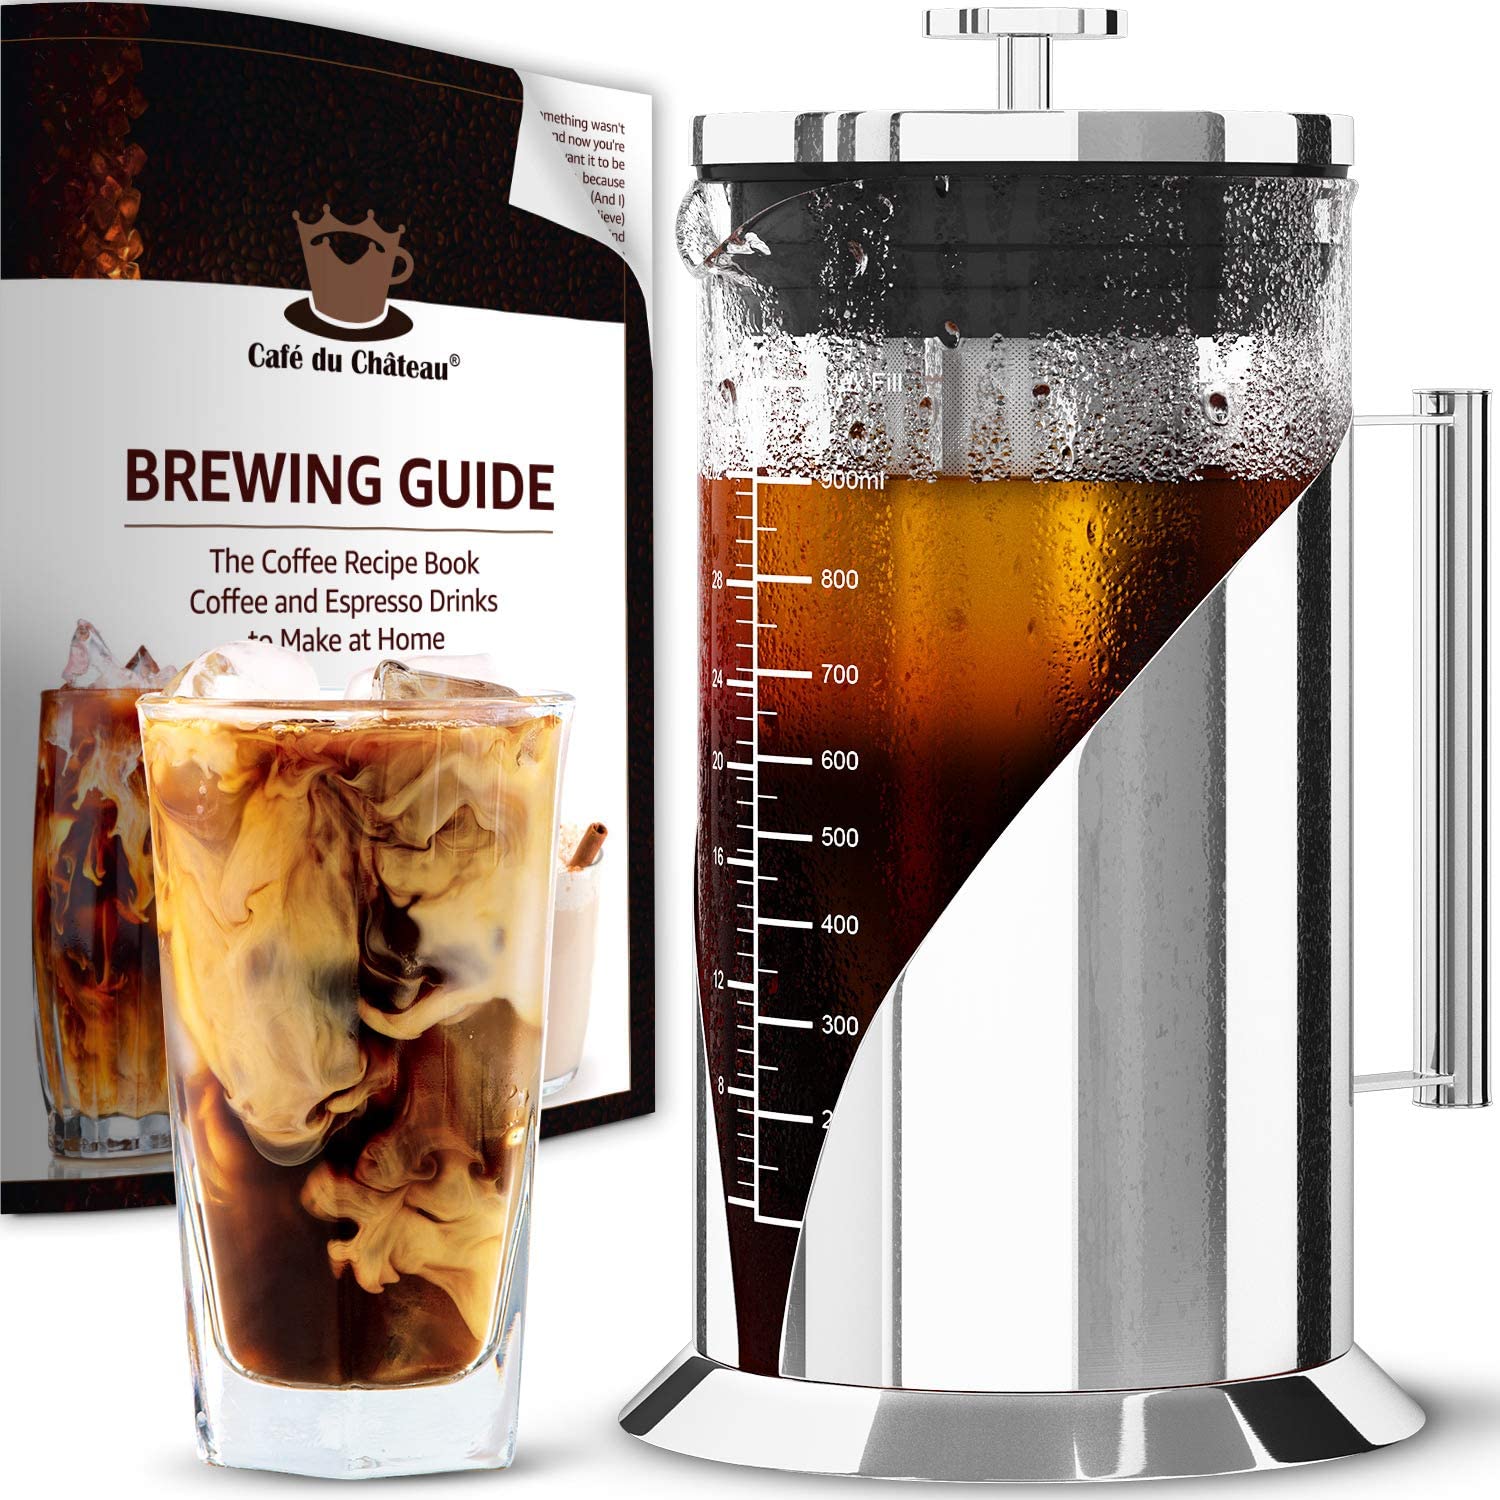 https://thecoffeemakersguide.com/media/original_images/Cafe_du_Chateau_Cold_Brew_Coffee_Maker.jpg